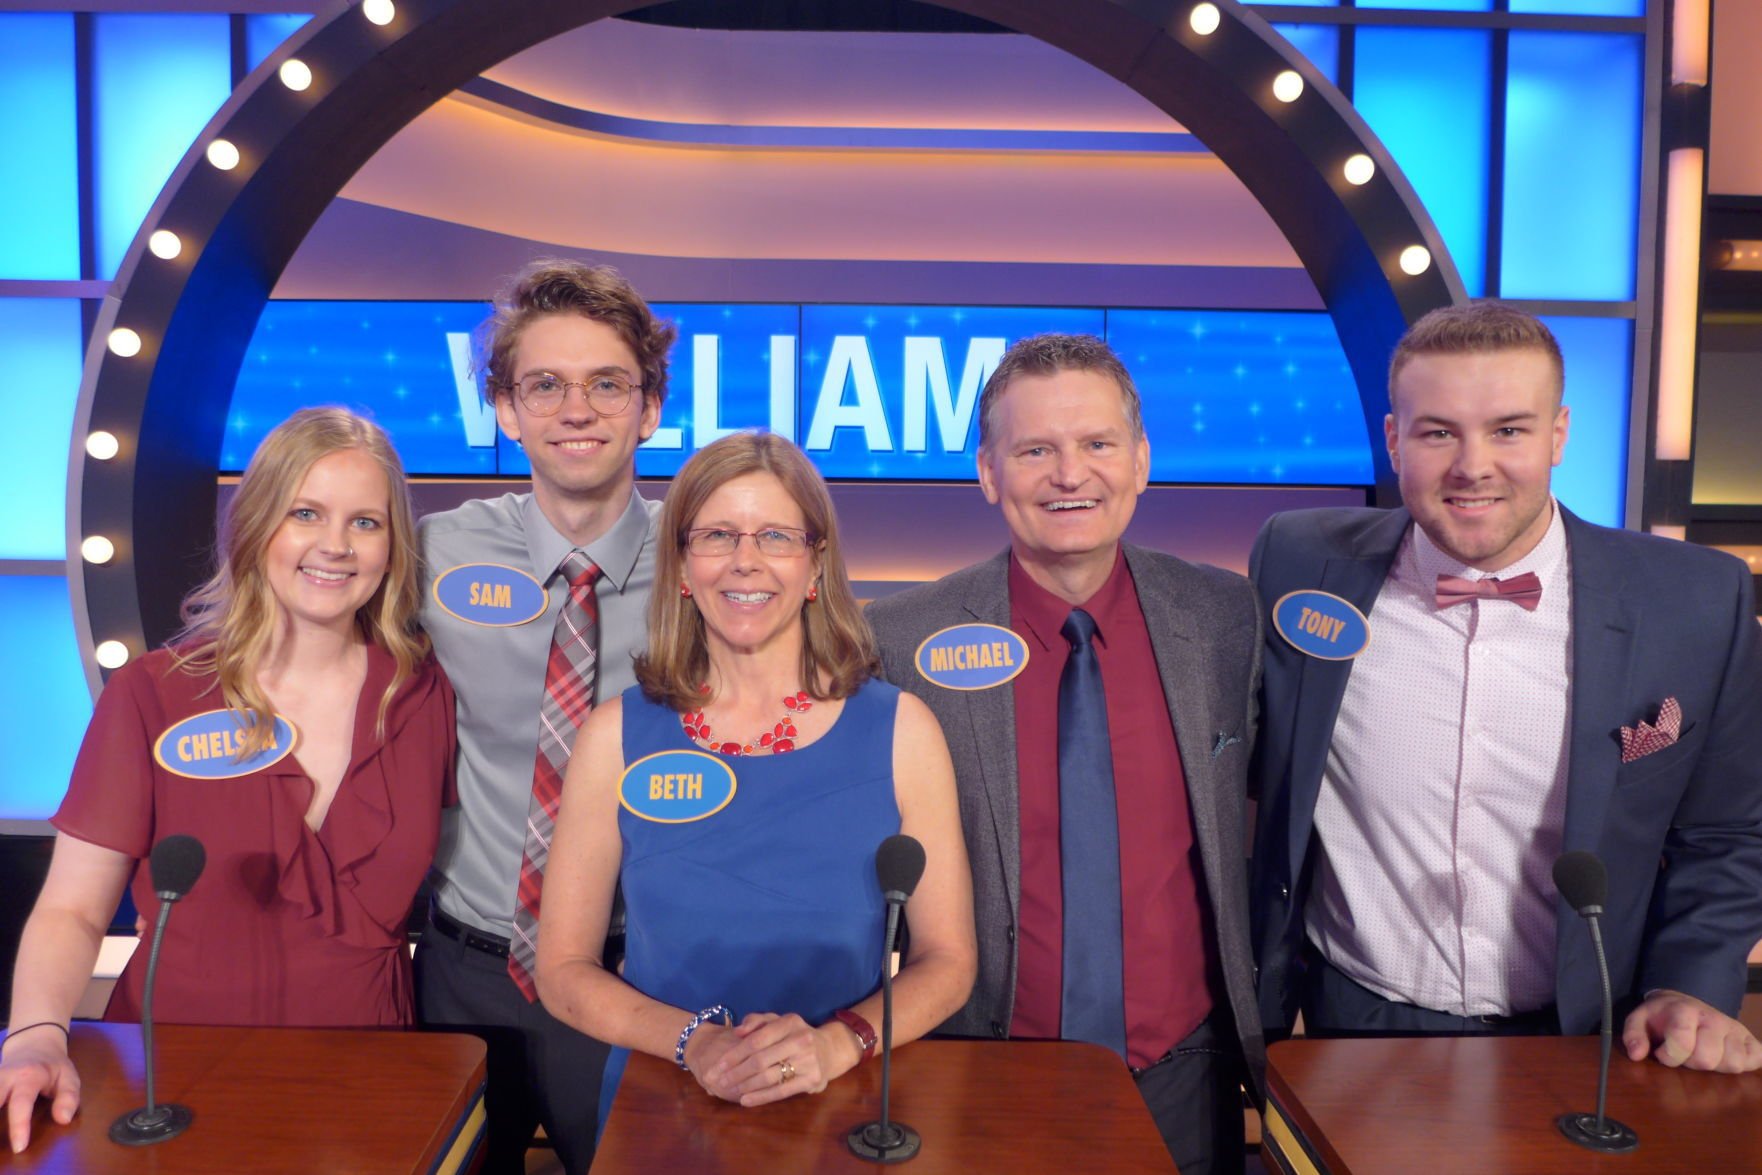 family feud auditions